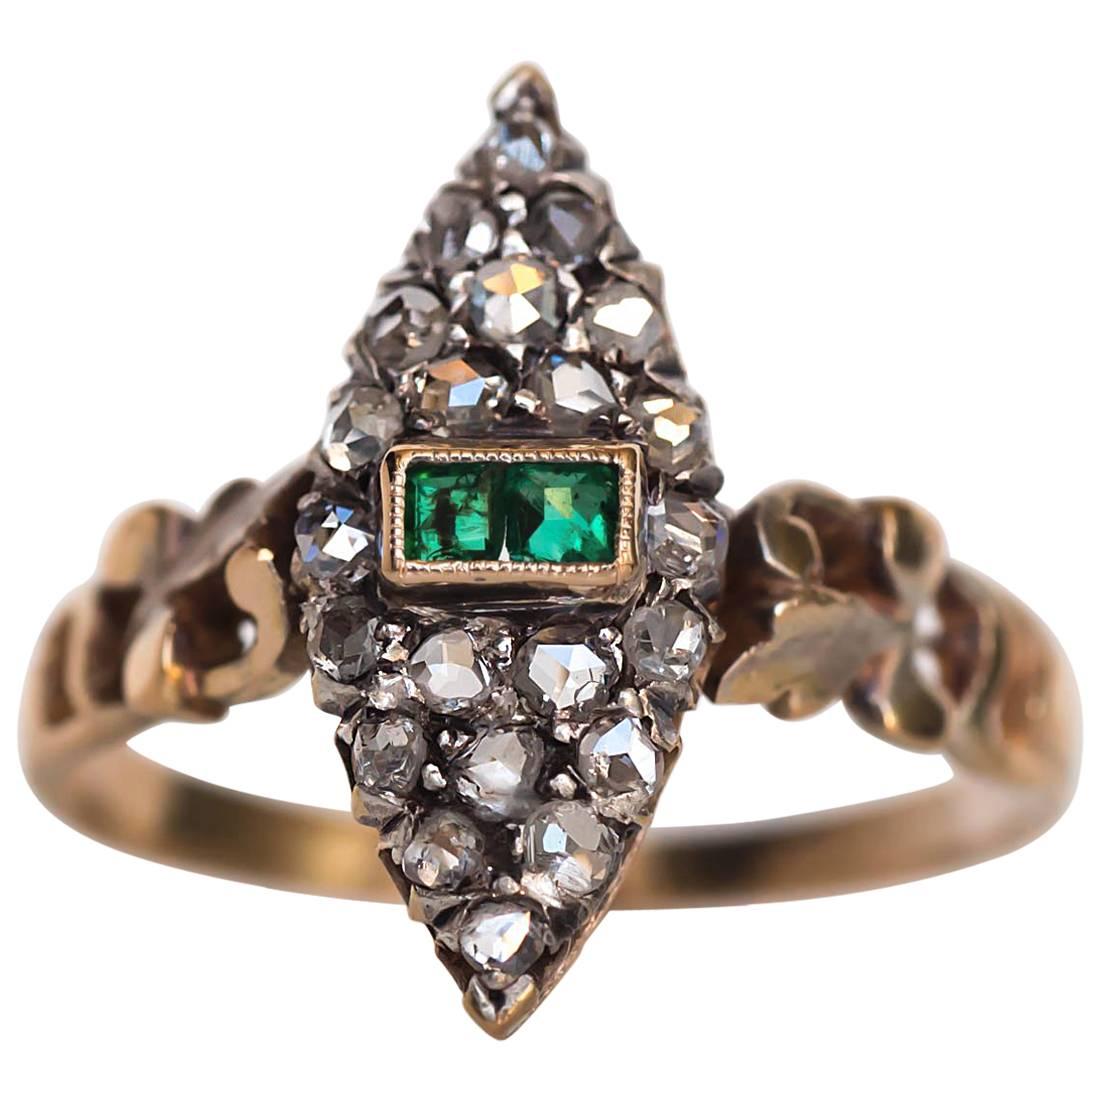 1880s Victorian Yellow Gold Diamond and Emerald Engagement Ring